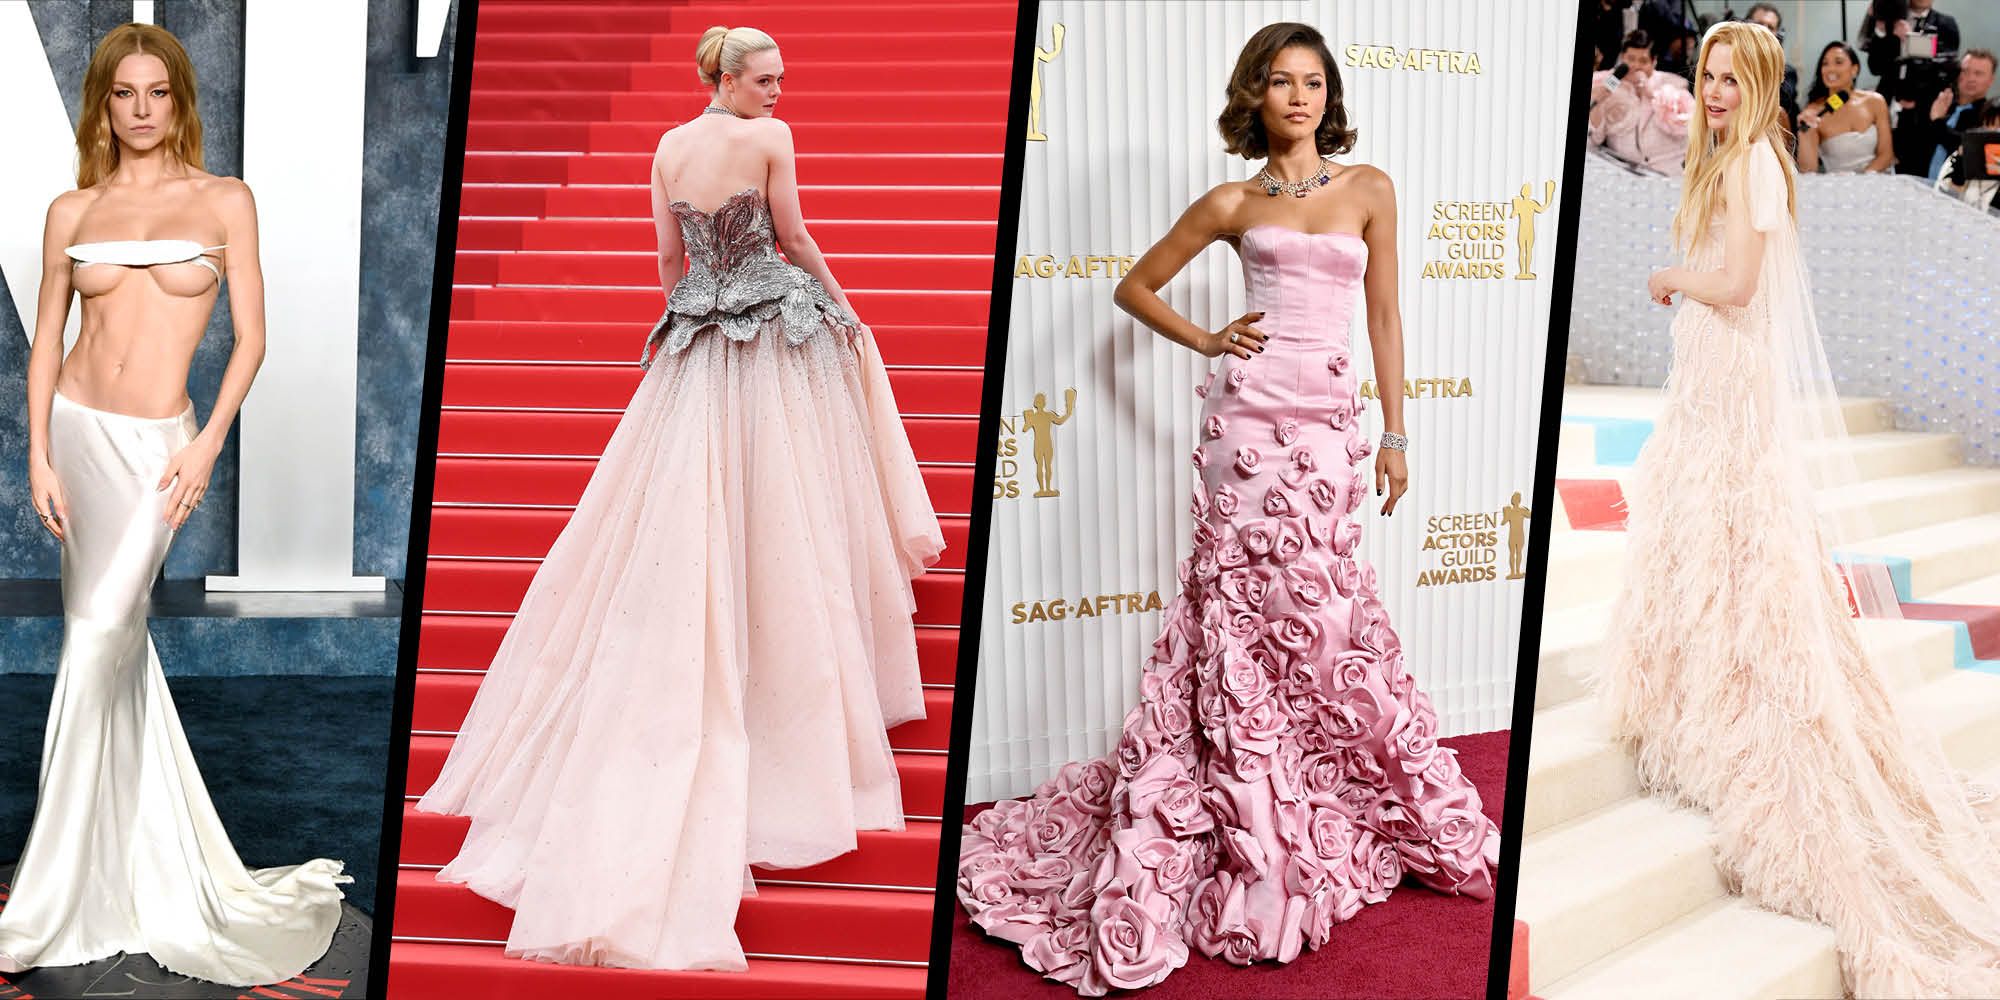 The Best Red Carpet Gowns of All Time | Celebrity dresses, Red carpet gowns,  Golden globes dresses